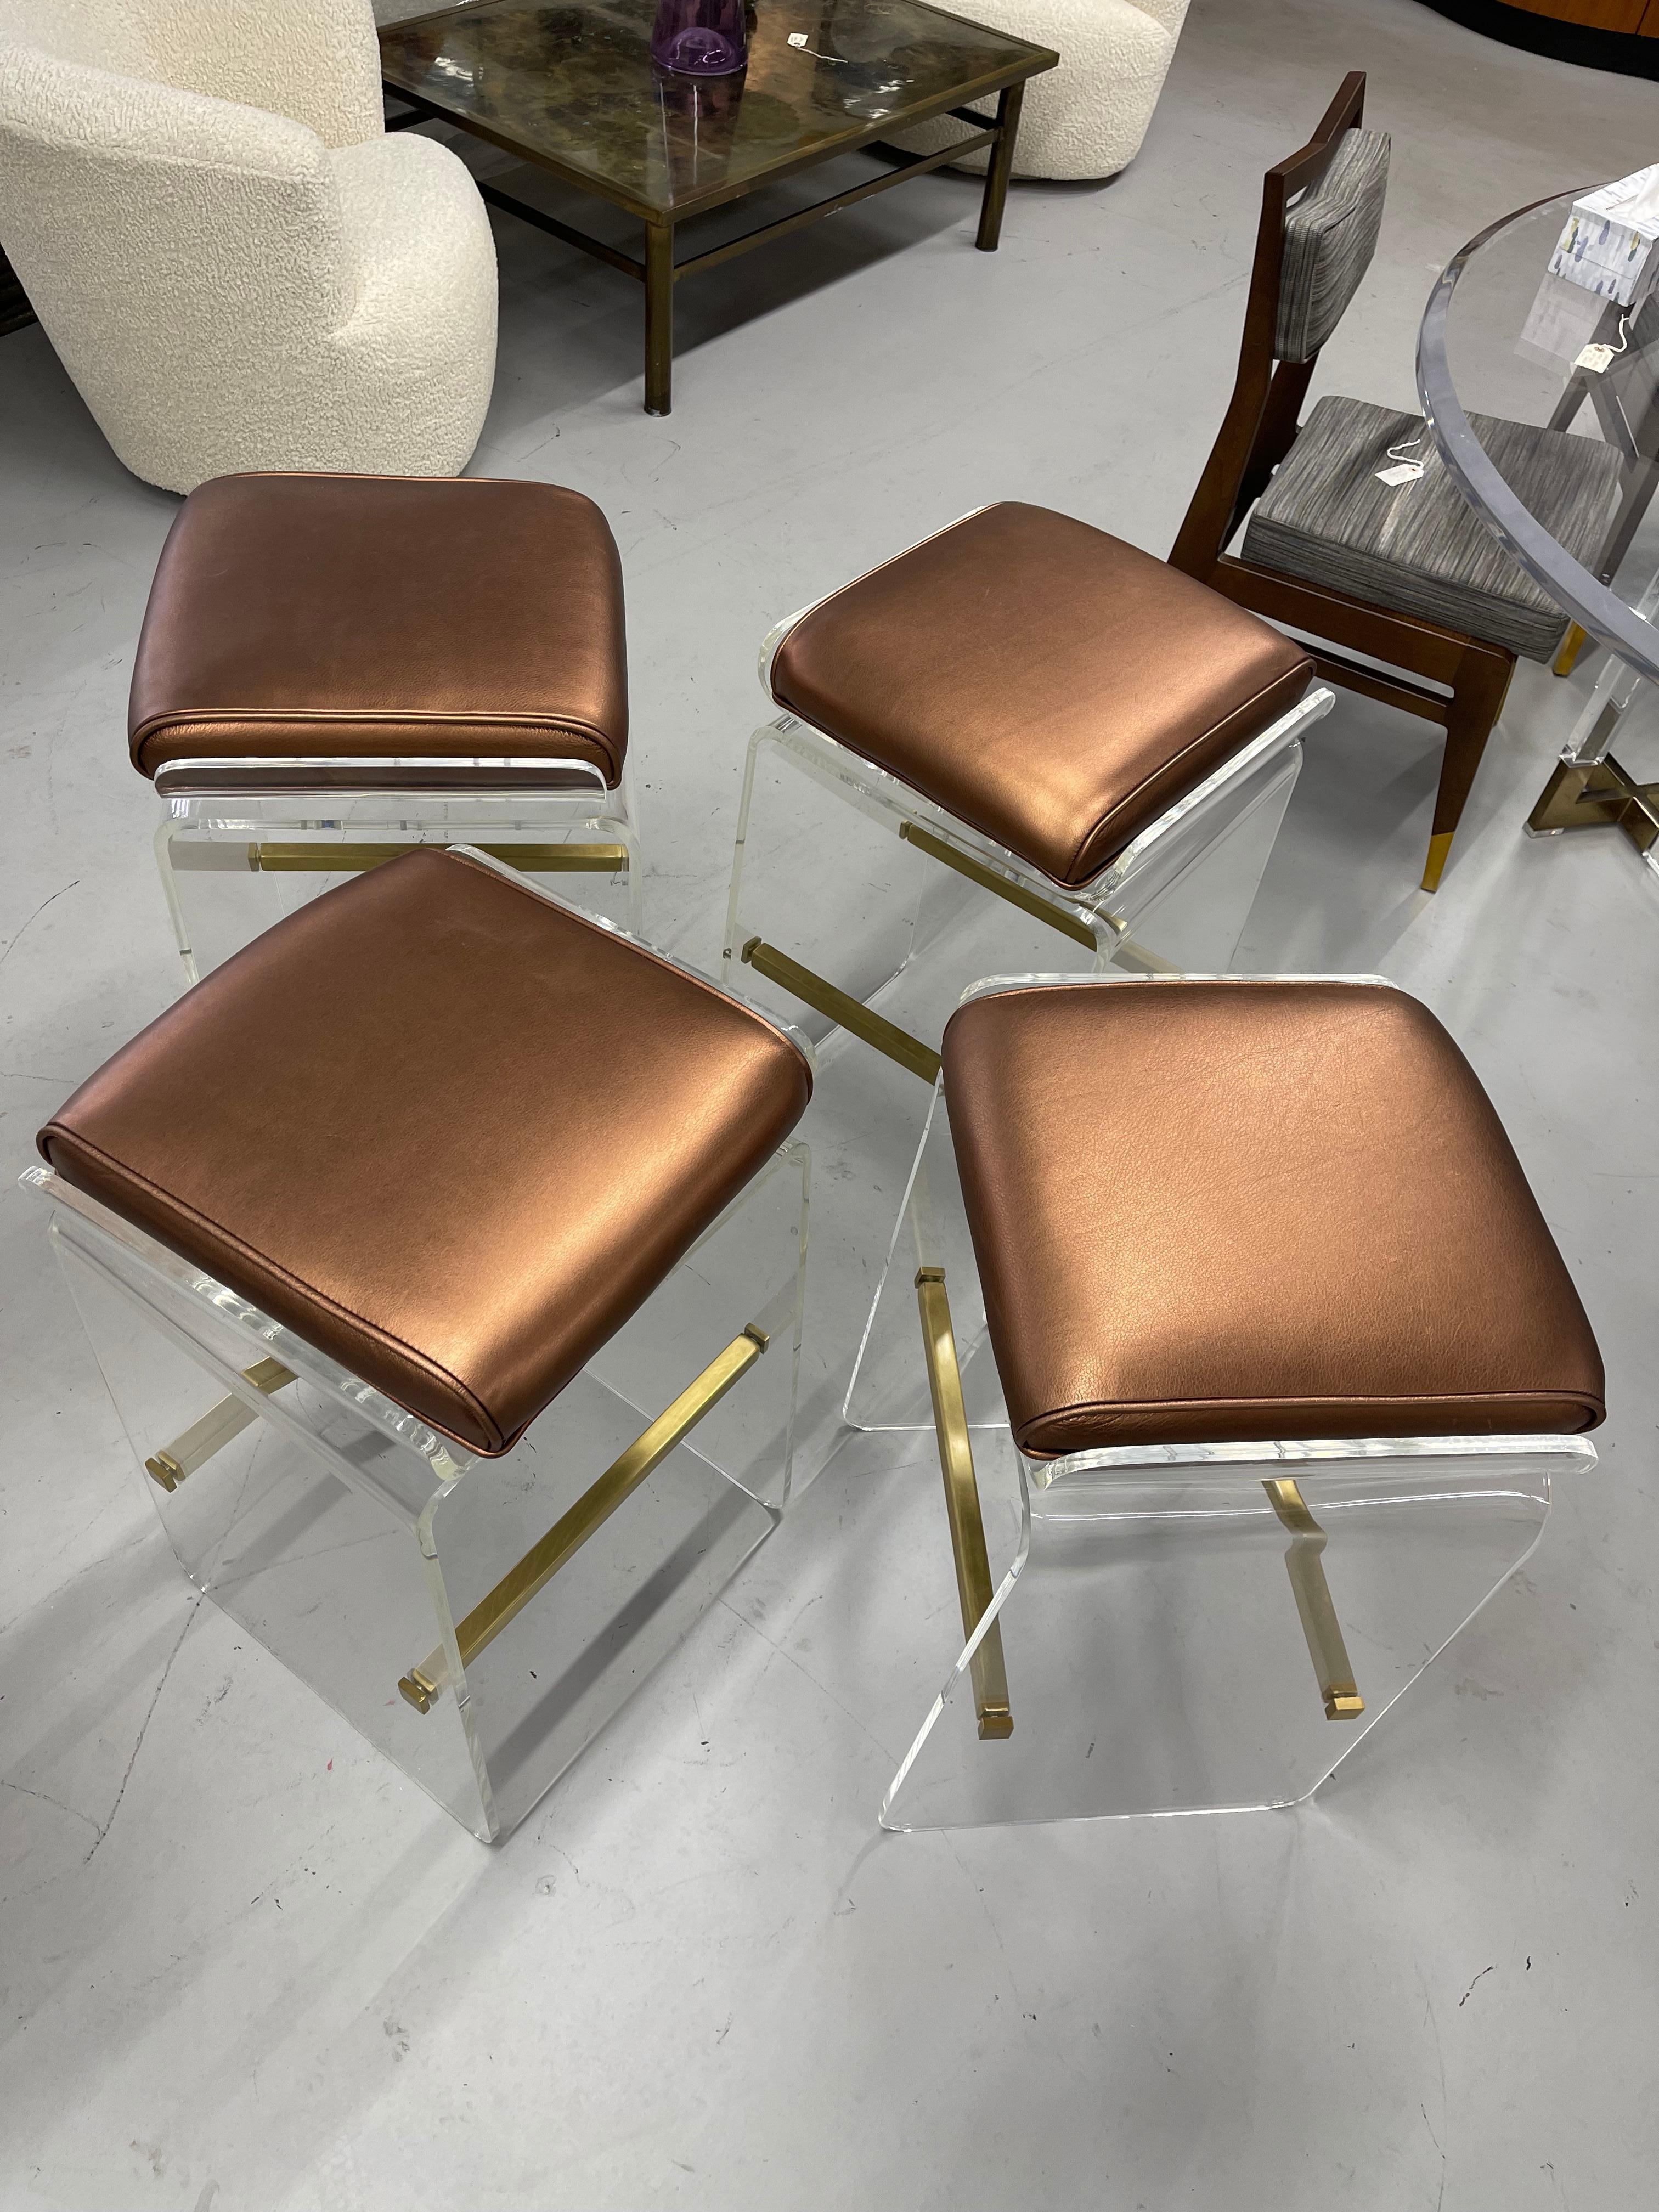 A pretty set of 4 Charles Hollis Jones Lucite and brass bar stools with copper colored leather seats. The seats swivel. These are vintage stools that have been re-upholstered and reconditioned. They are in good condition with only some minor marks